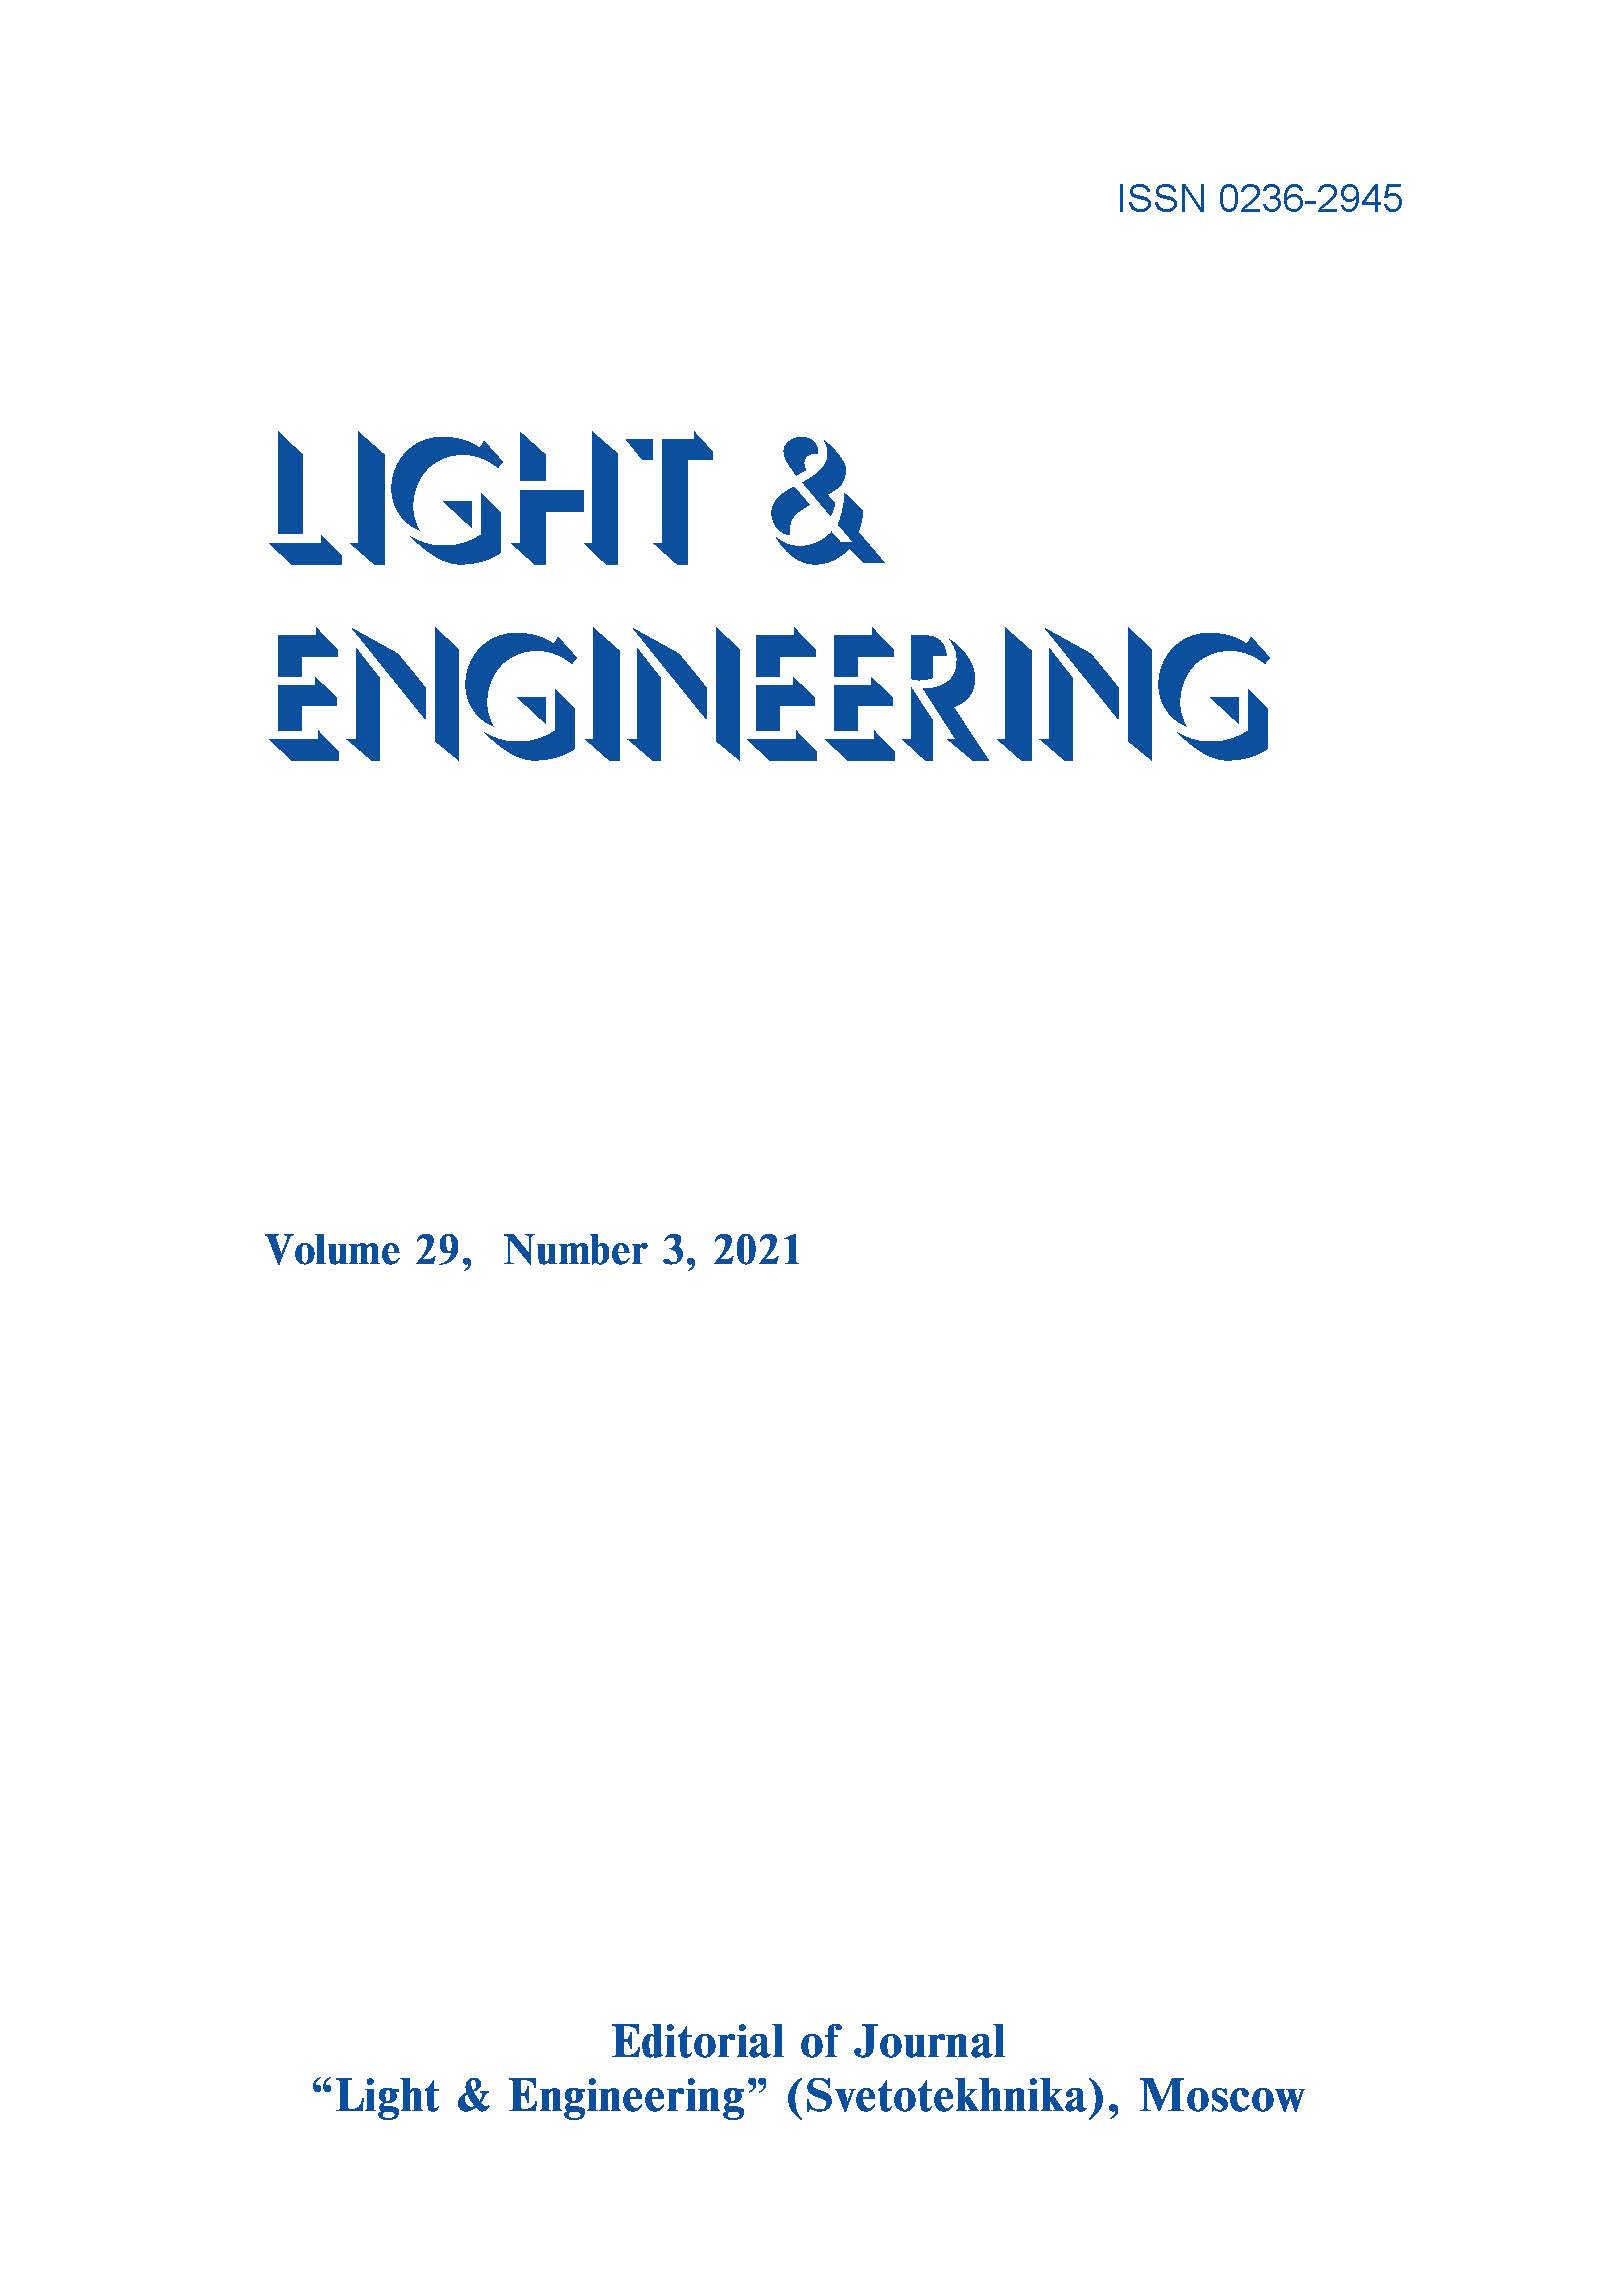 Justification Lighting Control System Using in The Classes On The Basis Of Lighting scene Simulation L&E, Vol. 29, No. 3, 2021